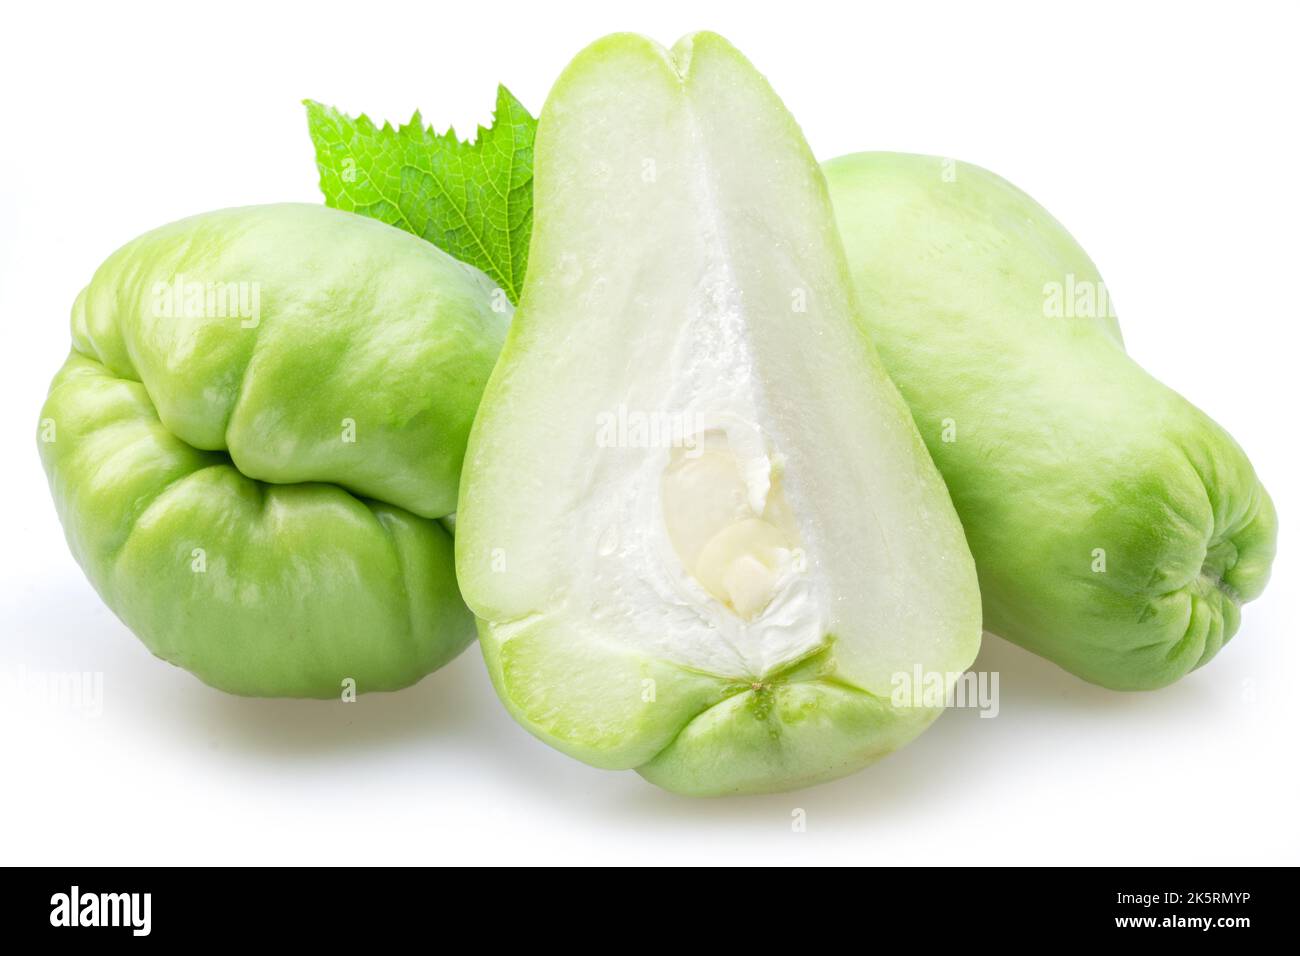 Chayote fruit and half of chayote fruit isolated on white background. Stock Photo